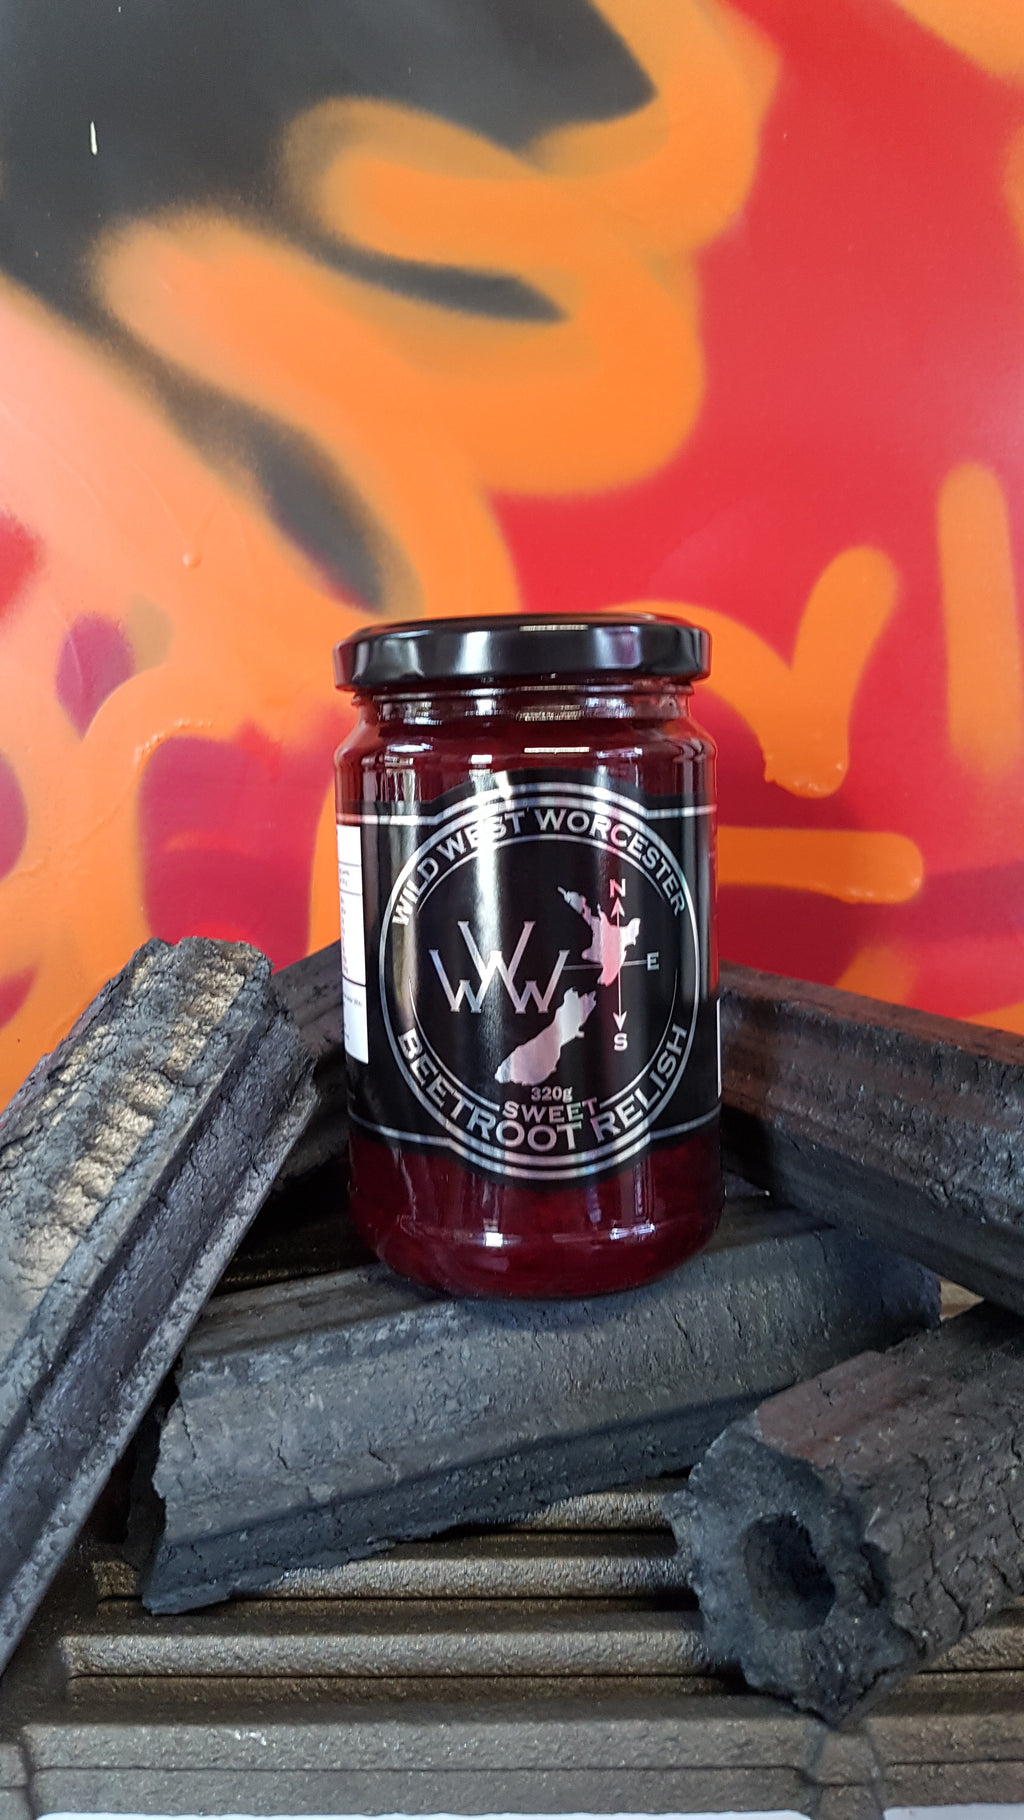 Sweet Beetroot Relish 320g by Wild West Worcester